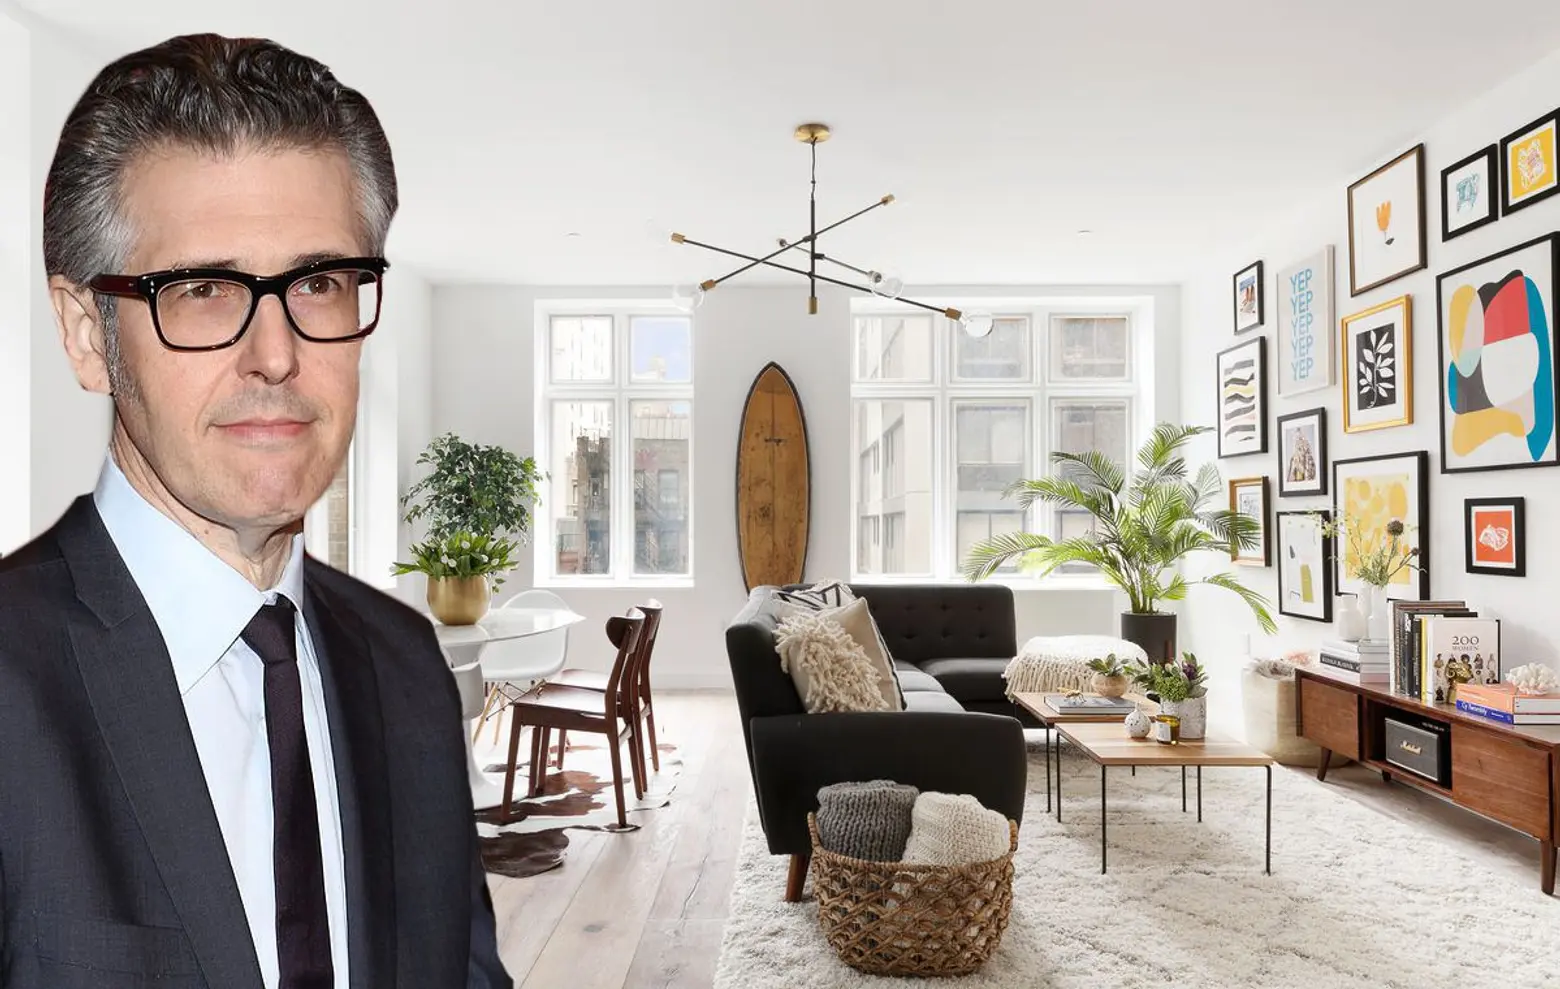 ‘This American Life’ host Ira Glass lists renovated Chelsea condo for $1.75M